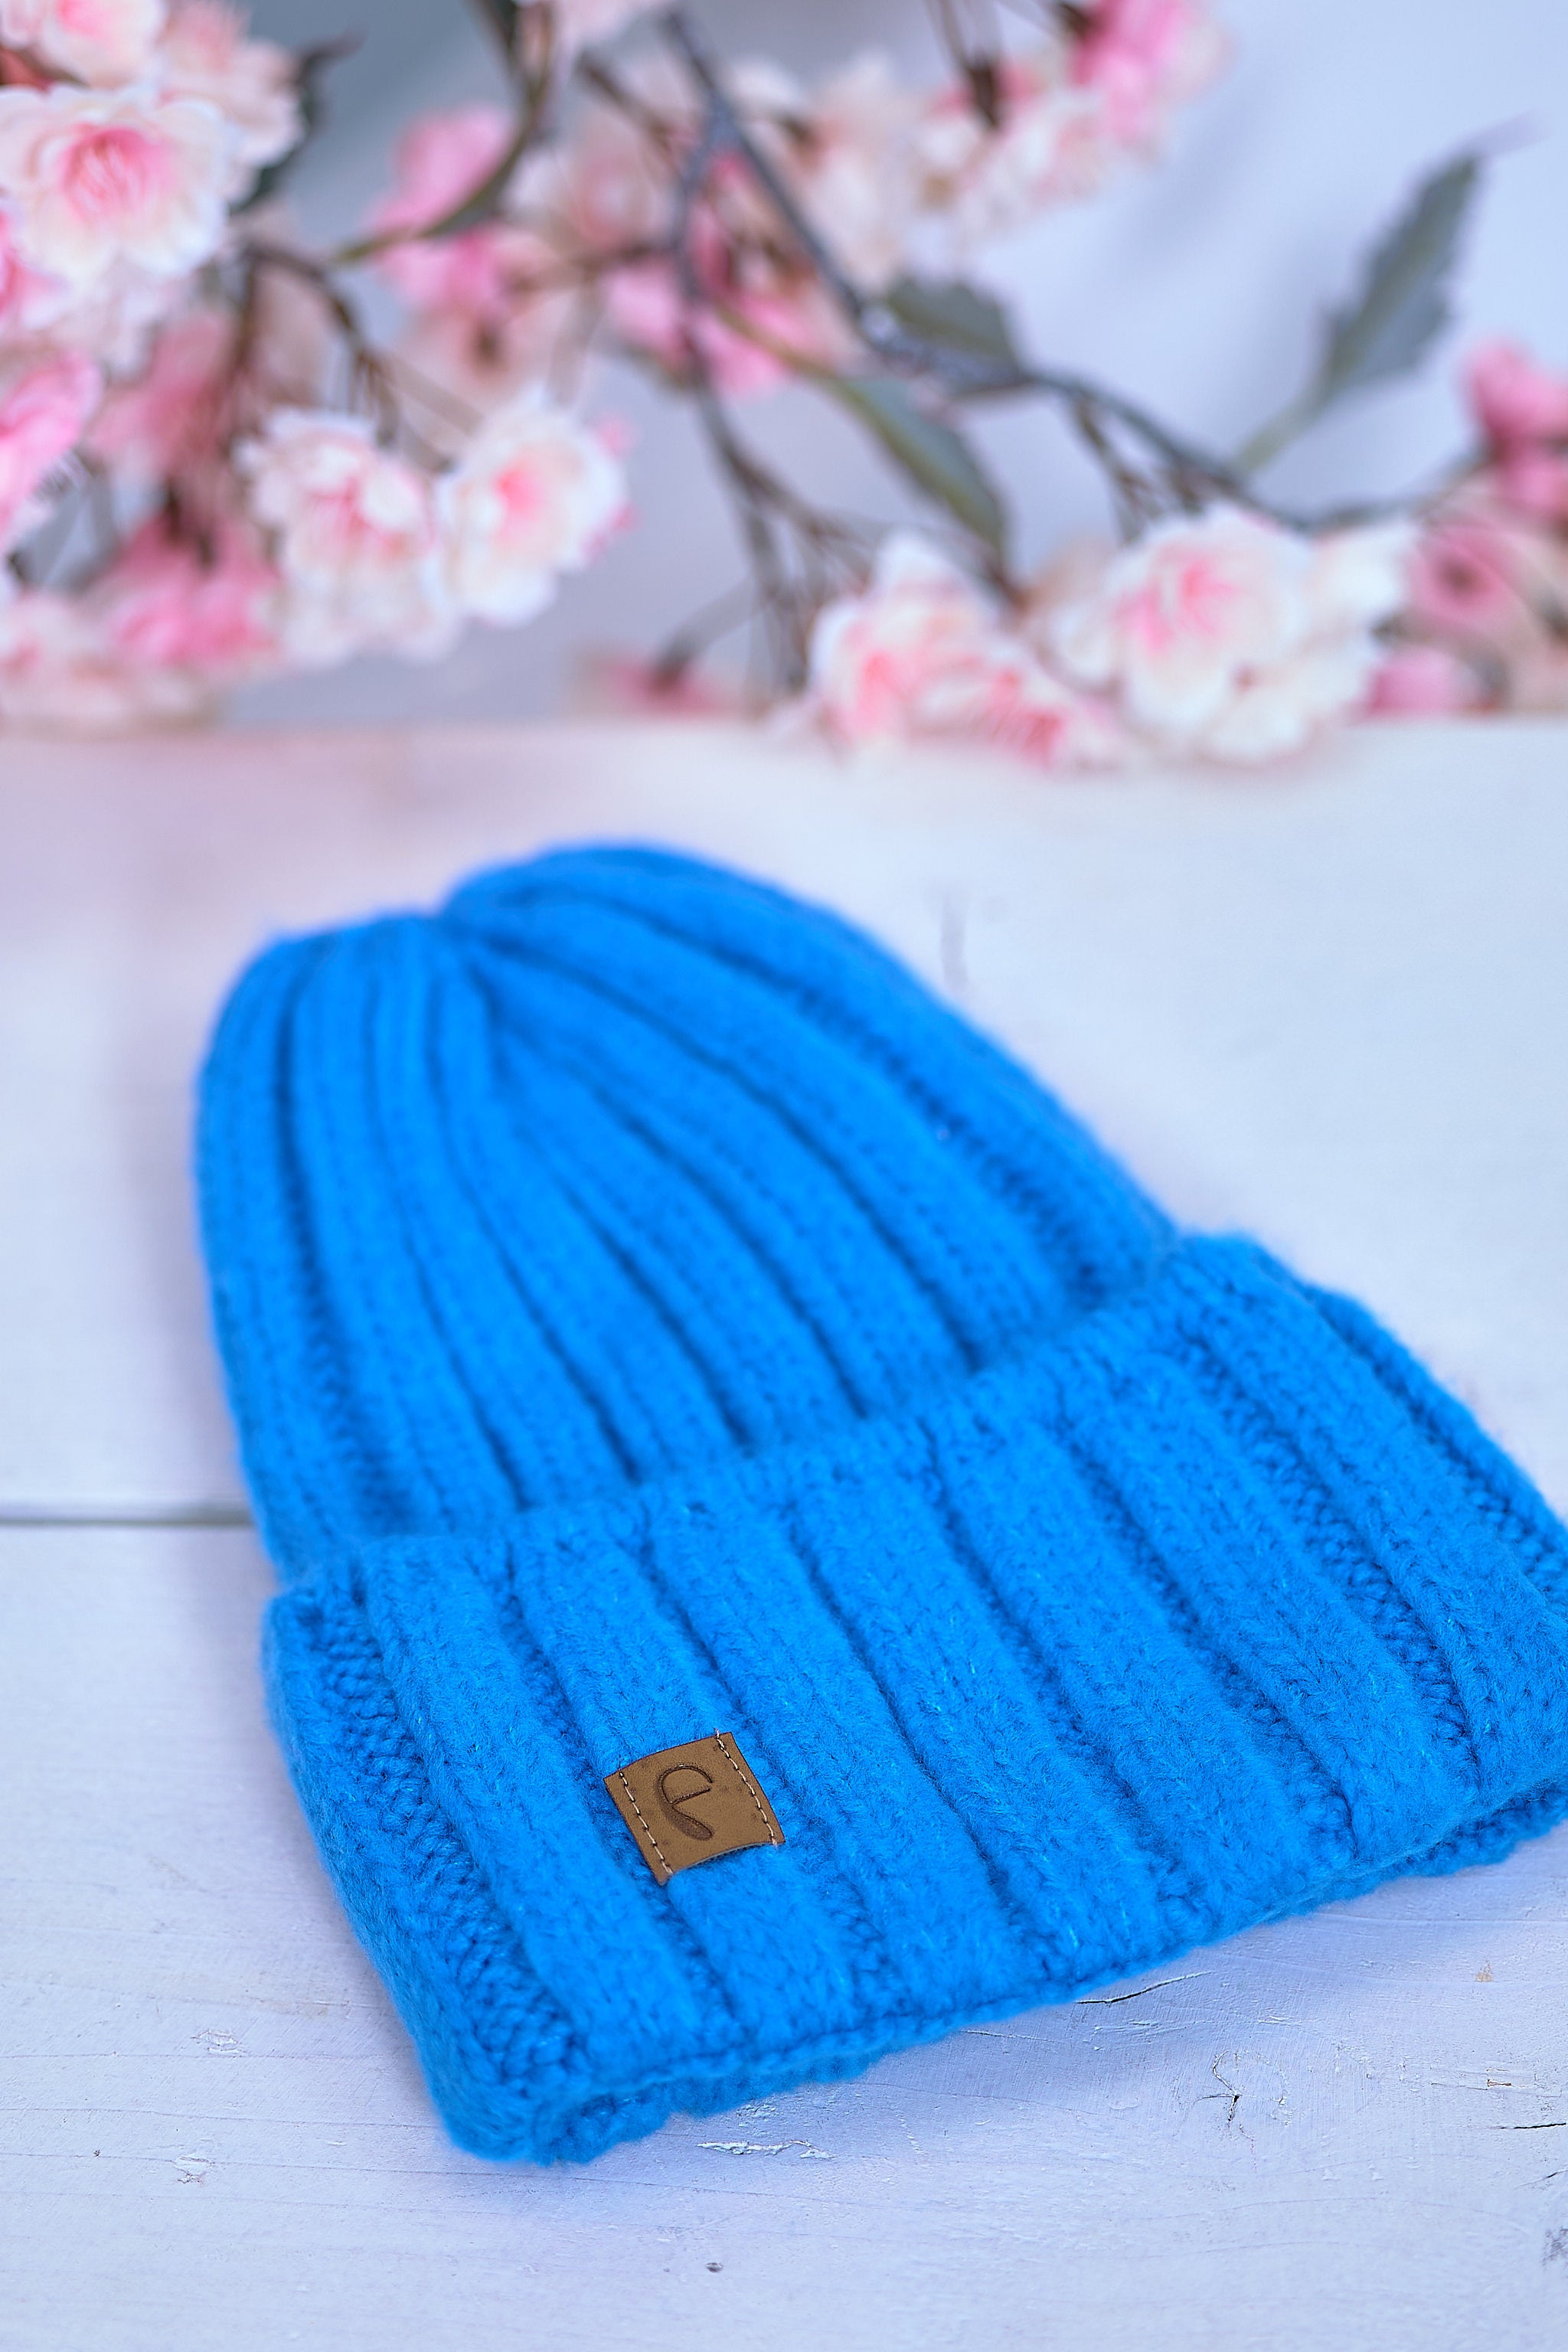 Cozy knitted hat, blue